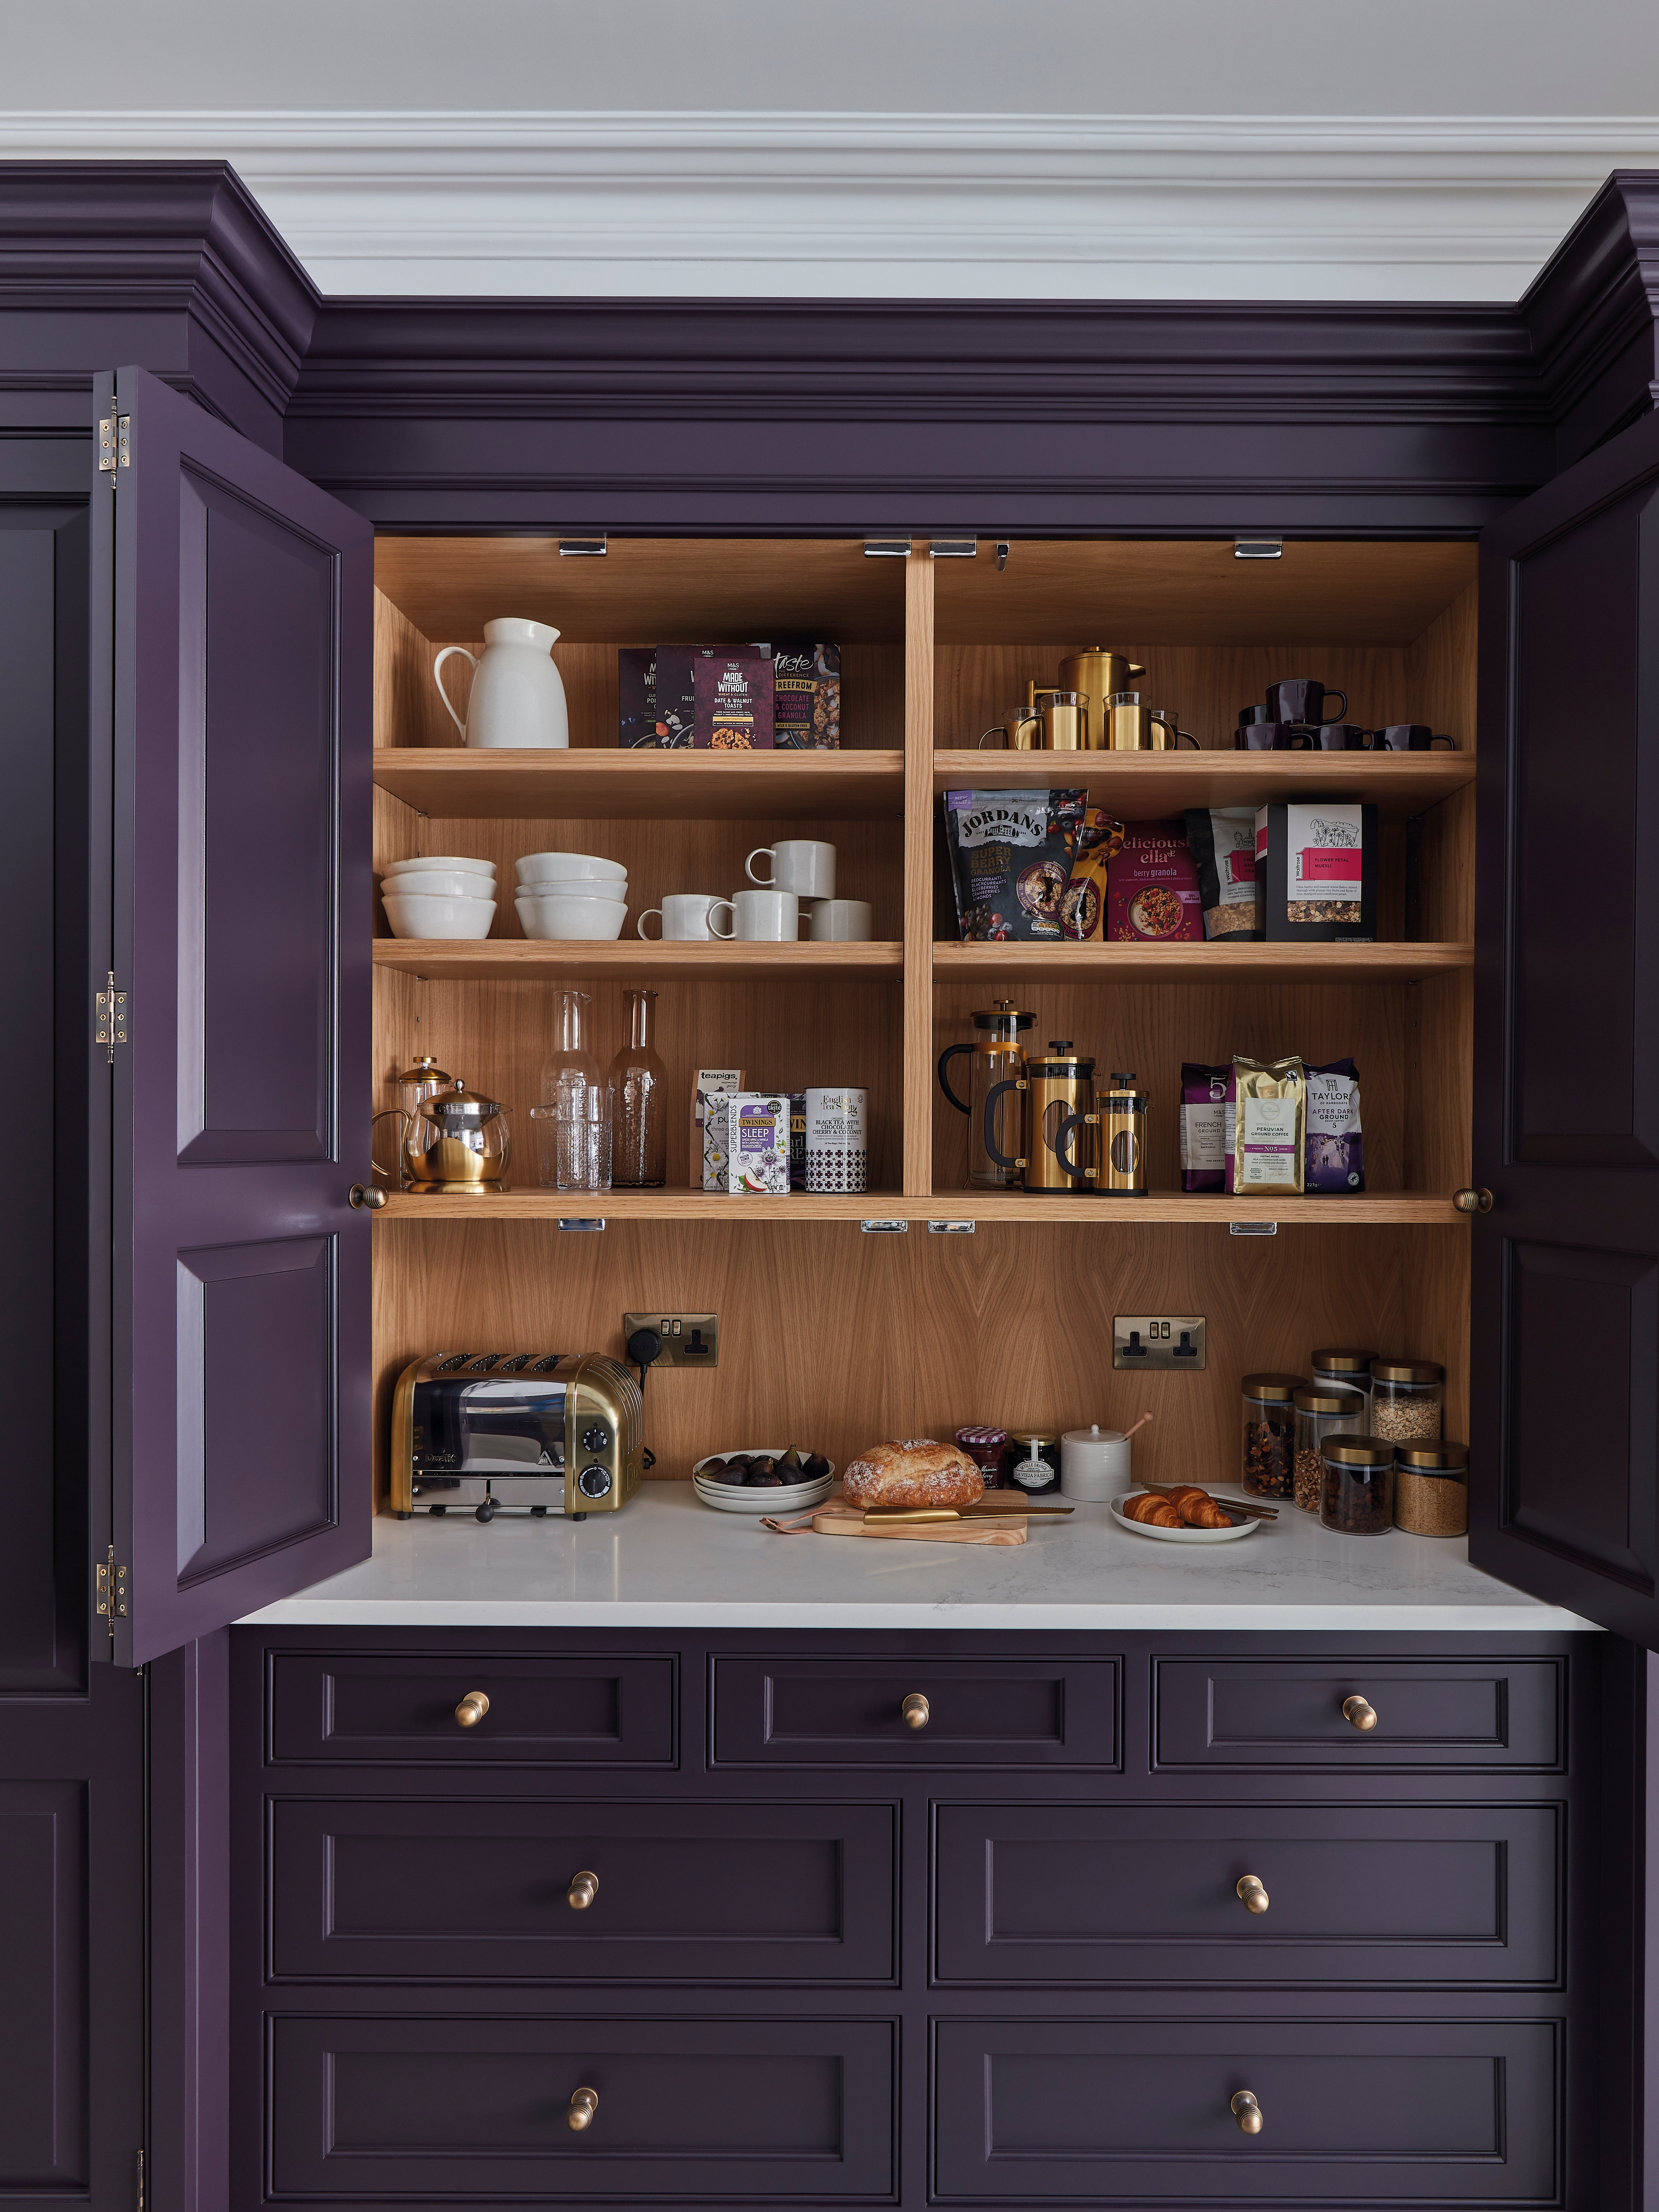 Bar carts, be gone! It’s all about the pantry